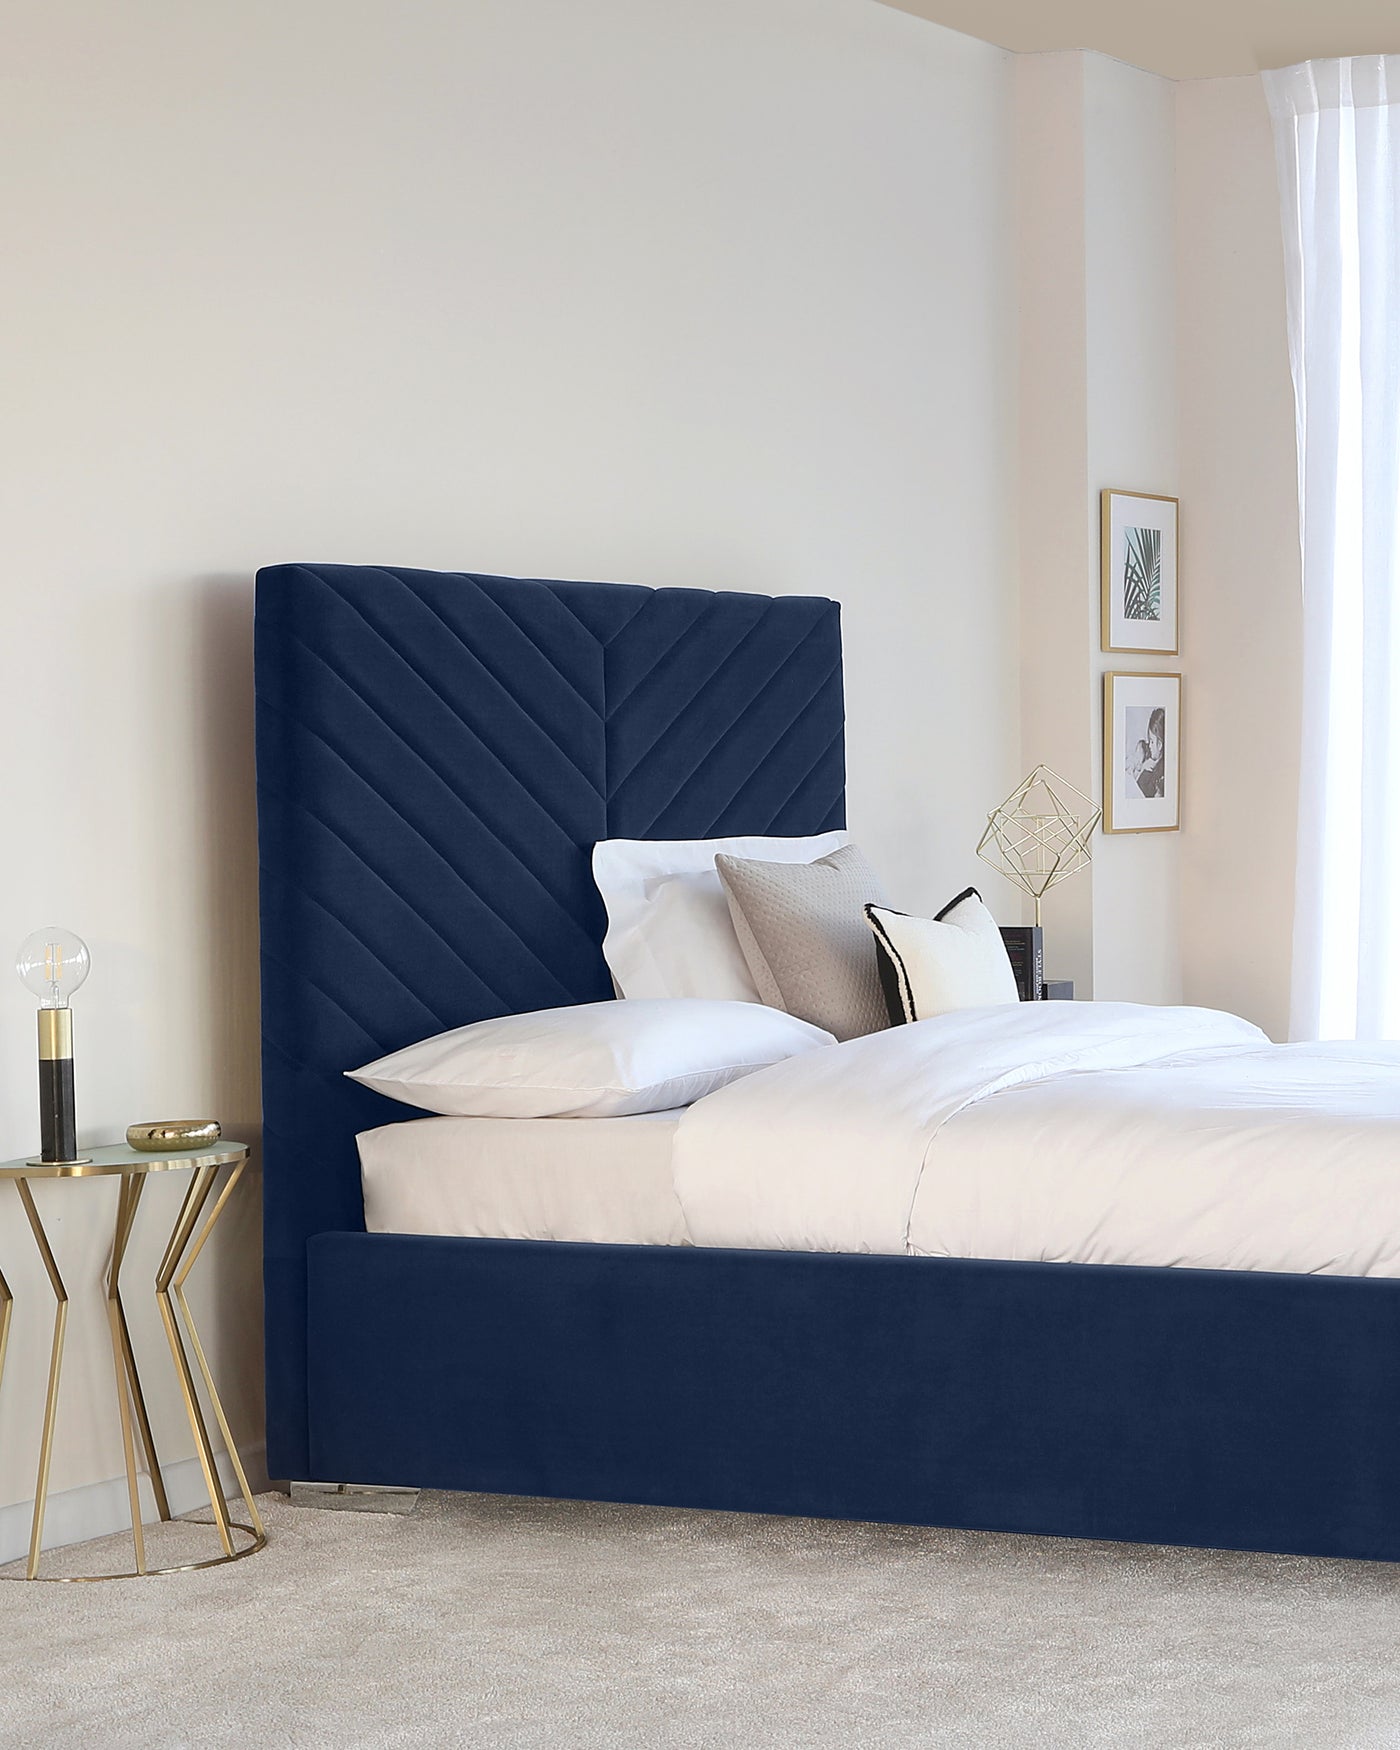 Elegant navy blue upholstered bed with a tall, diamond-tufted headboard and a plush velvet finish, complemented by a chic gold and glass side table with a geometric design.